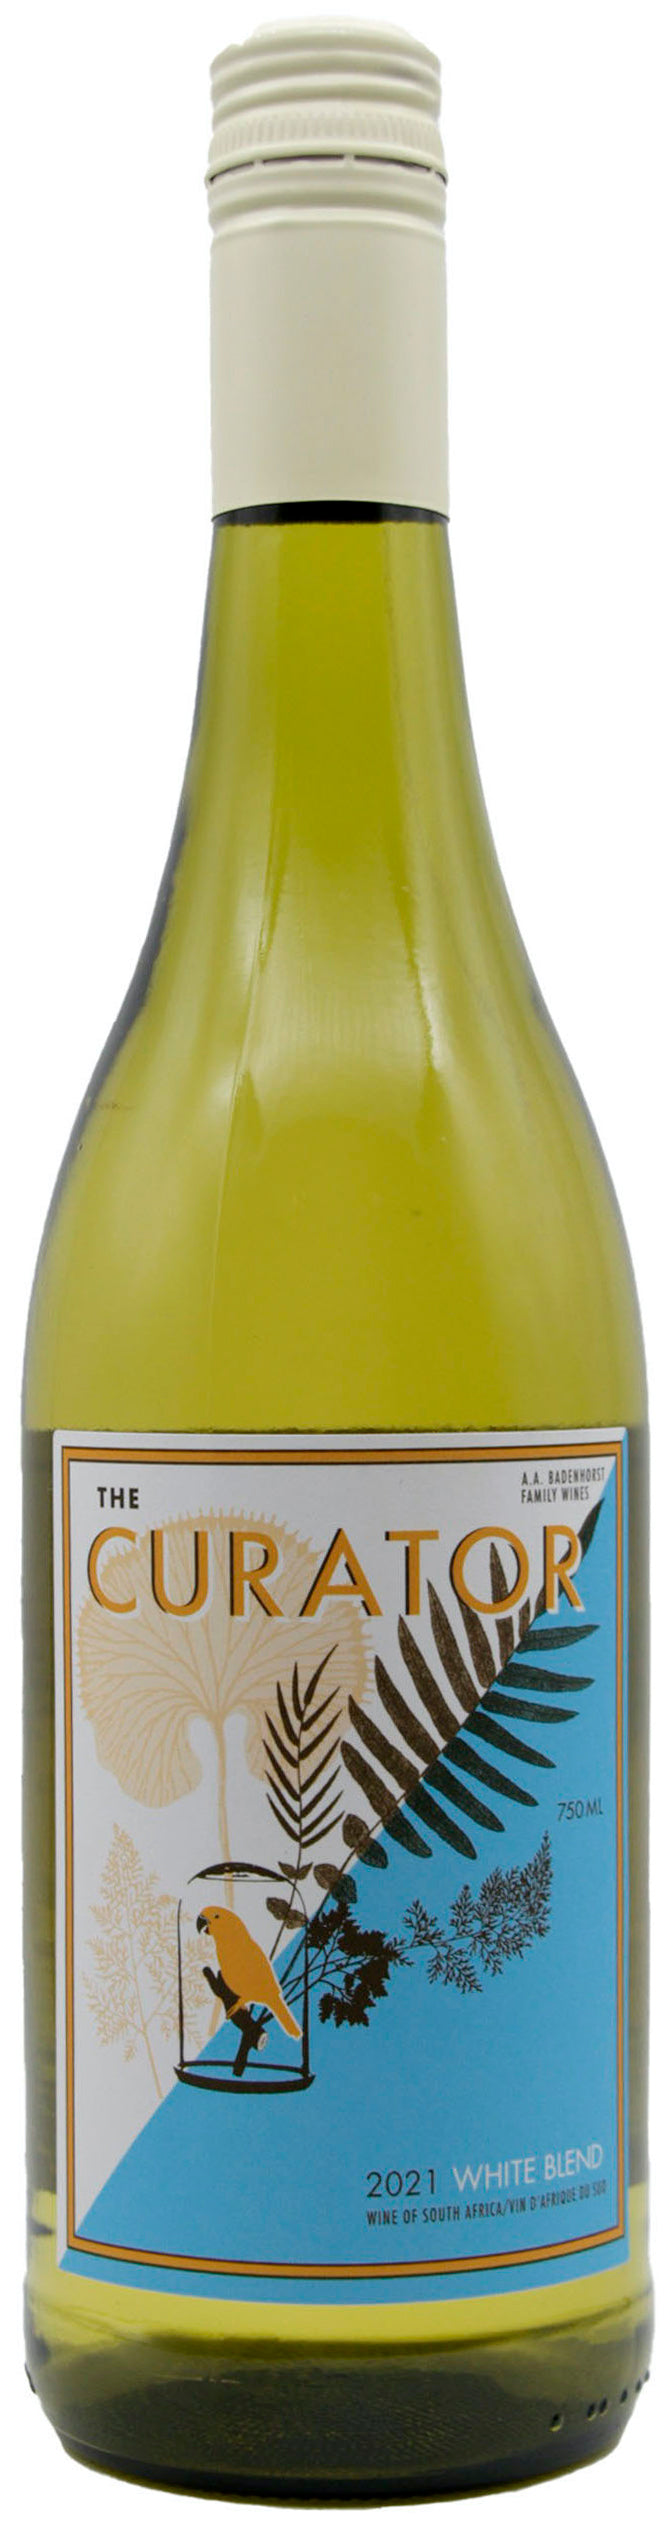 The Curator White Blend 2022